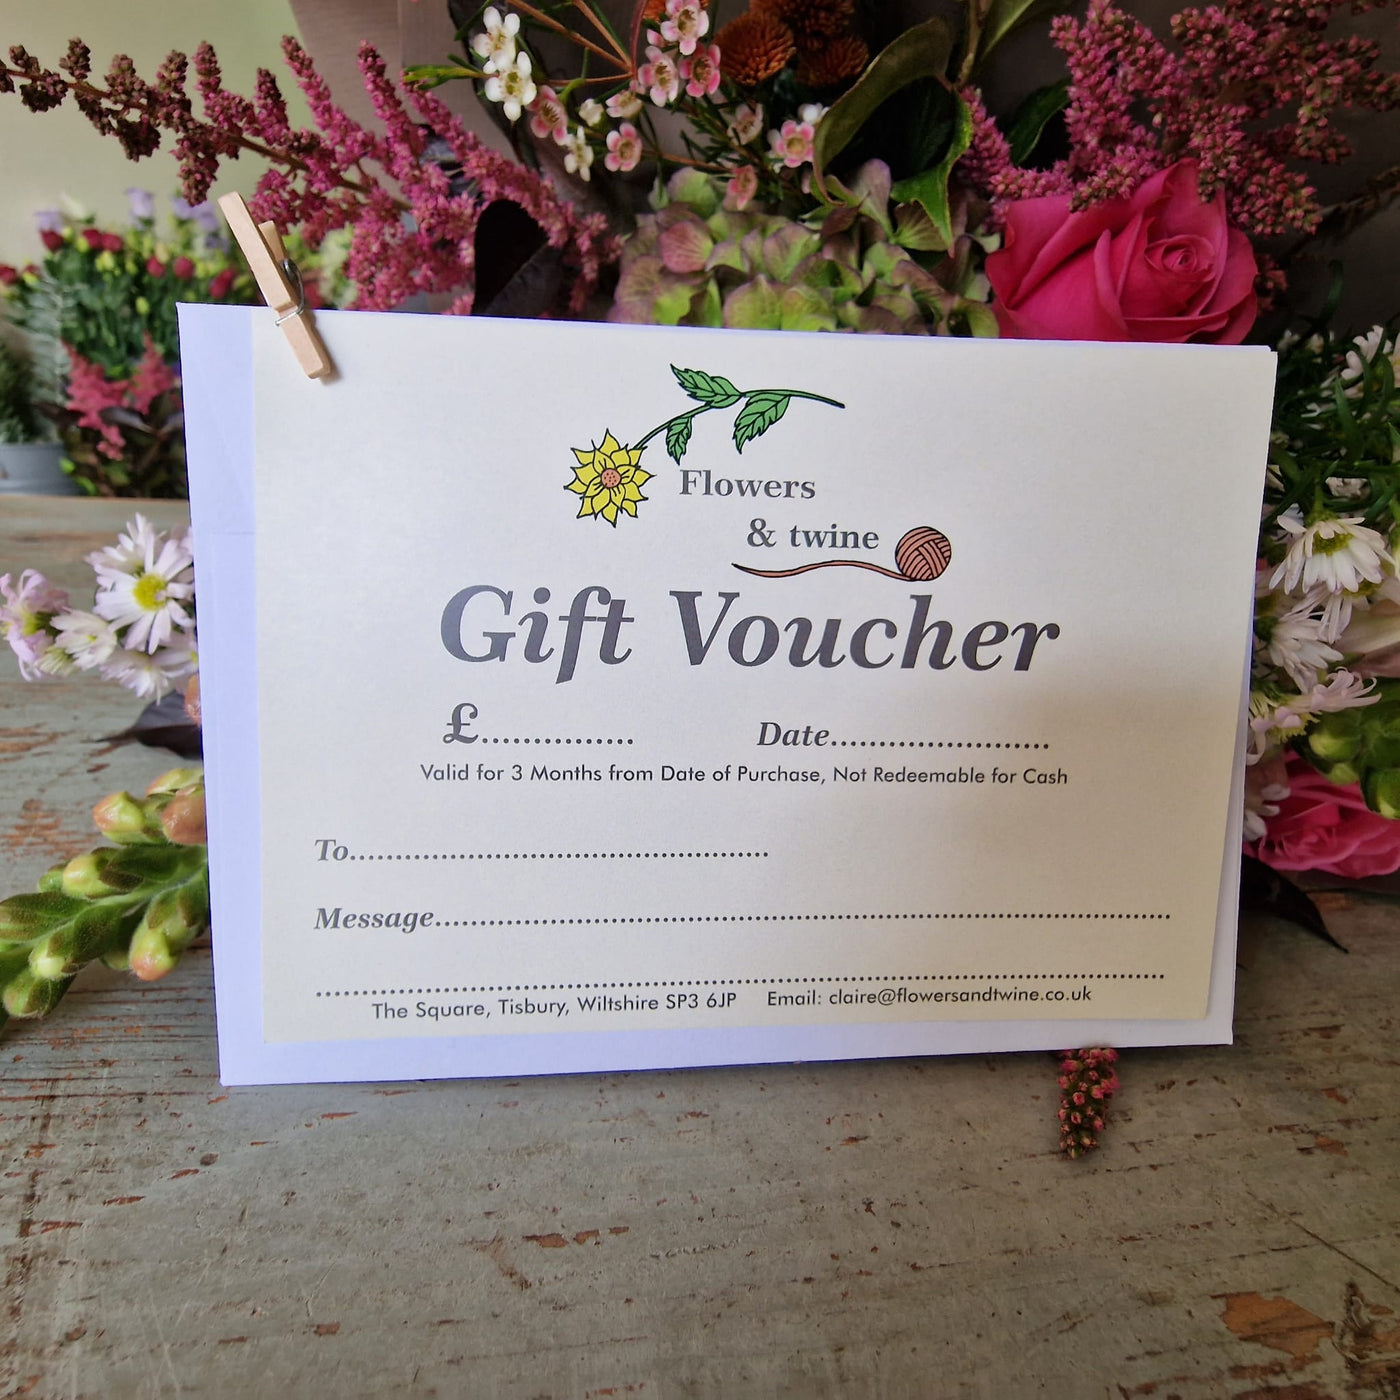 Flowers and twine gift vouchers